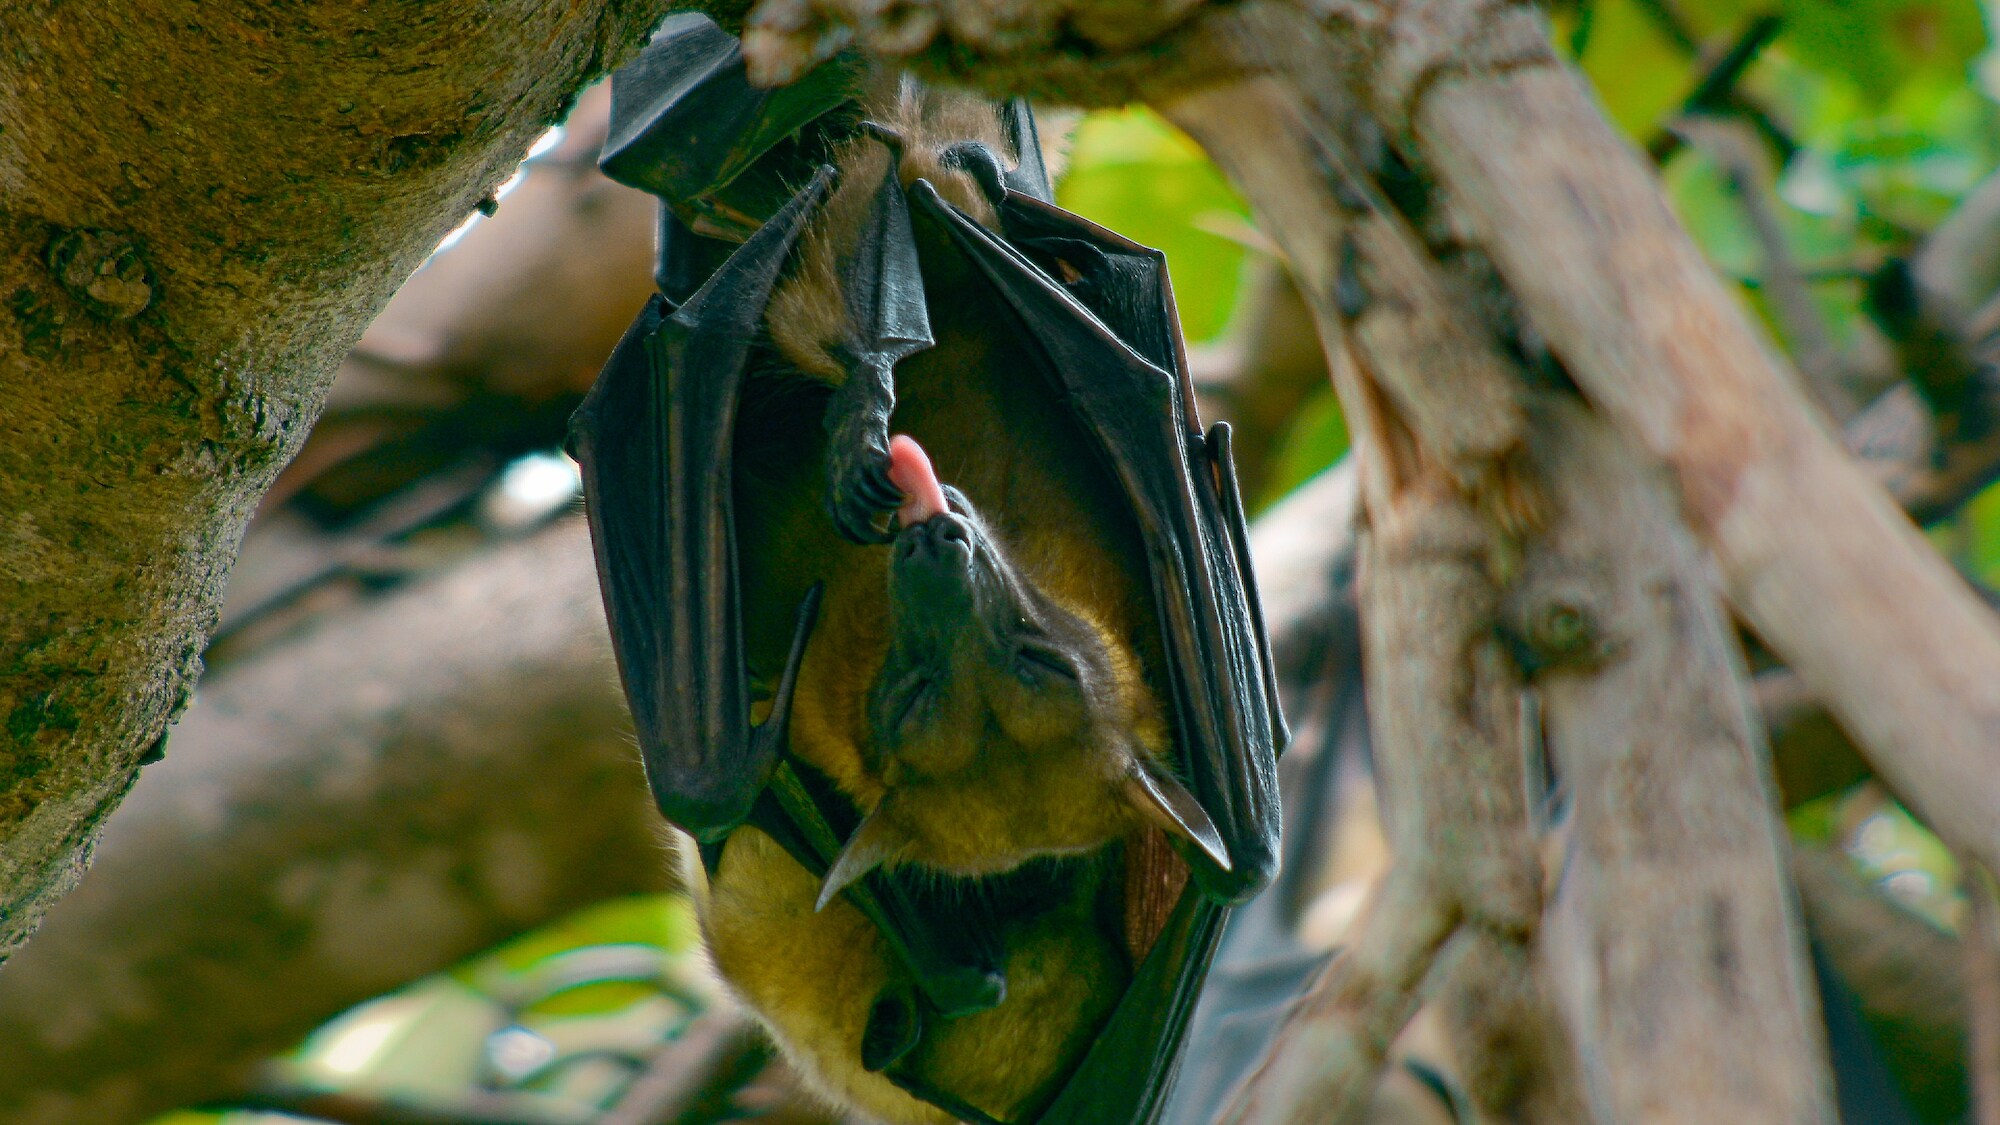 A Fruit bat resting in a tree, giving itself a good clean after a busy night foraging. (Credit: National Geographic/Bertie Gregory for Disney+)